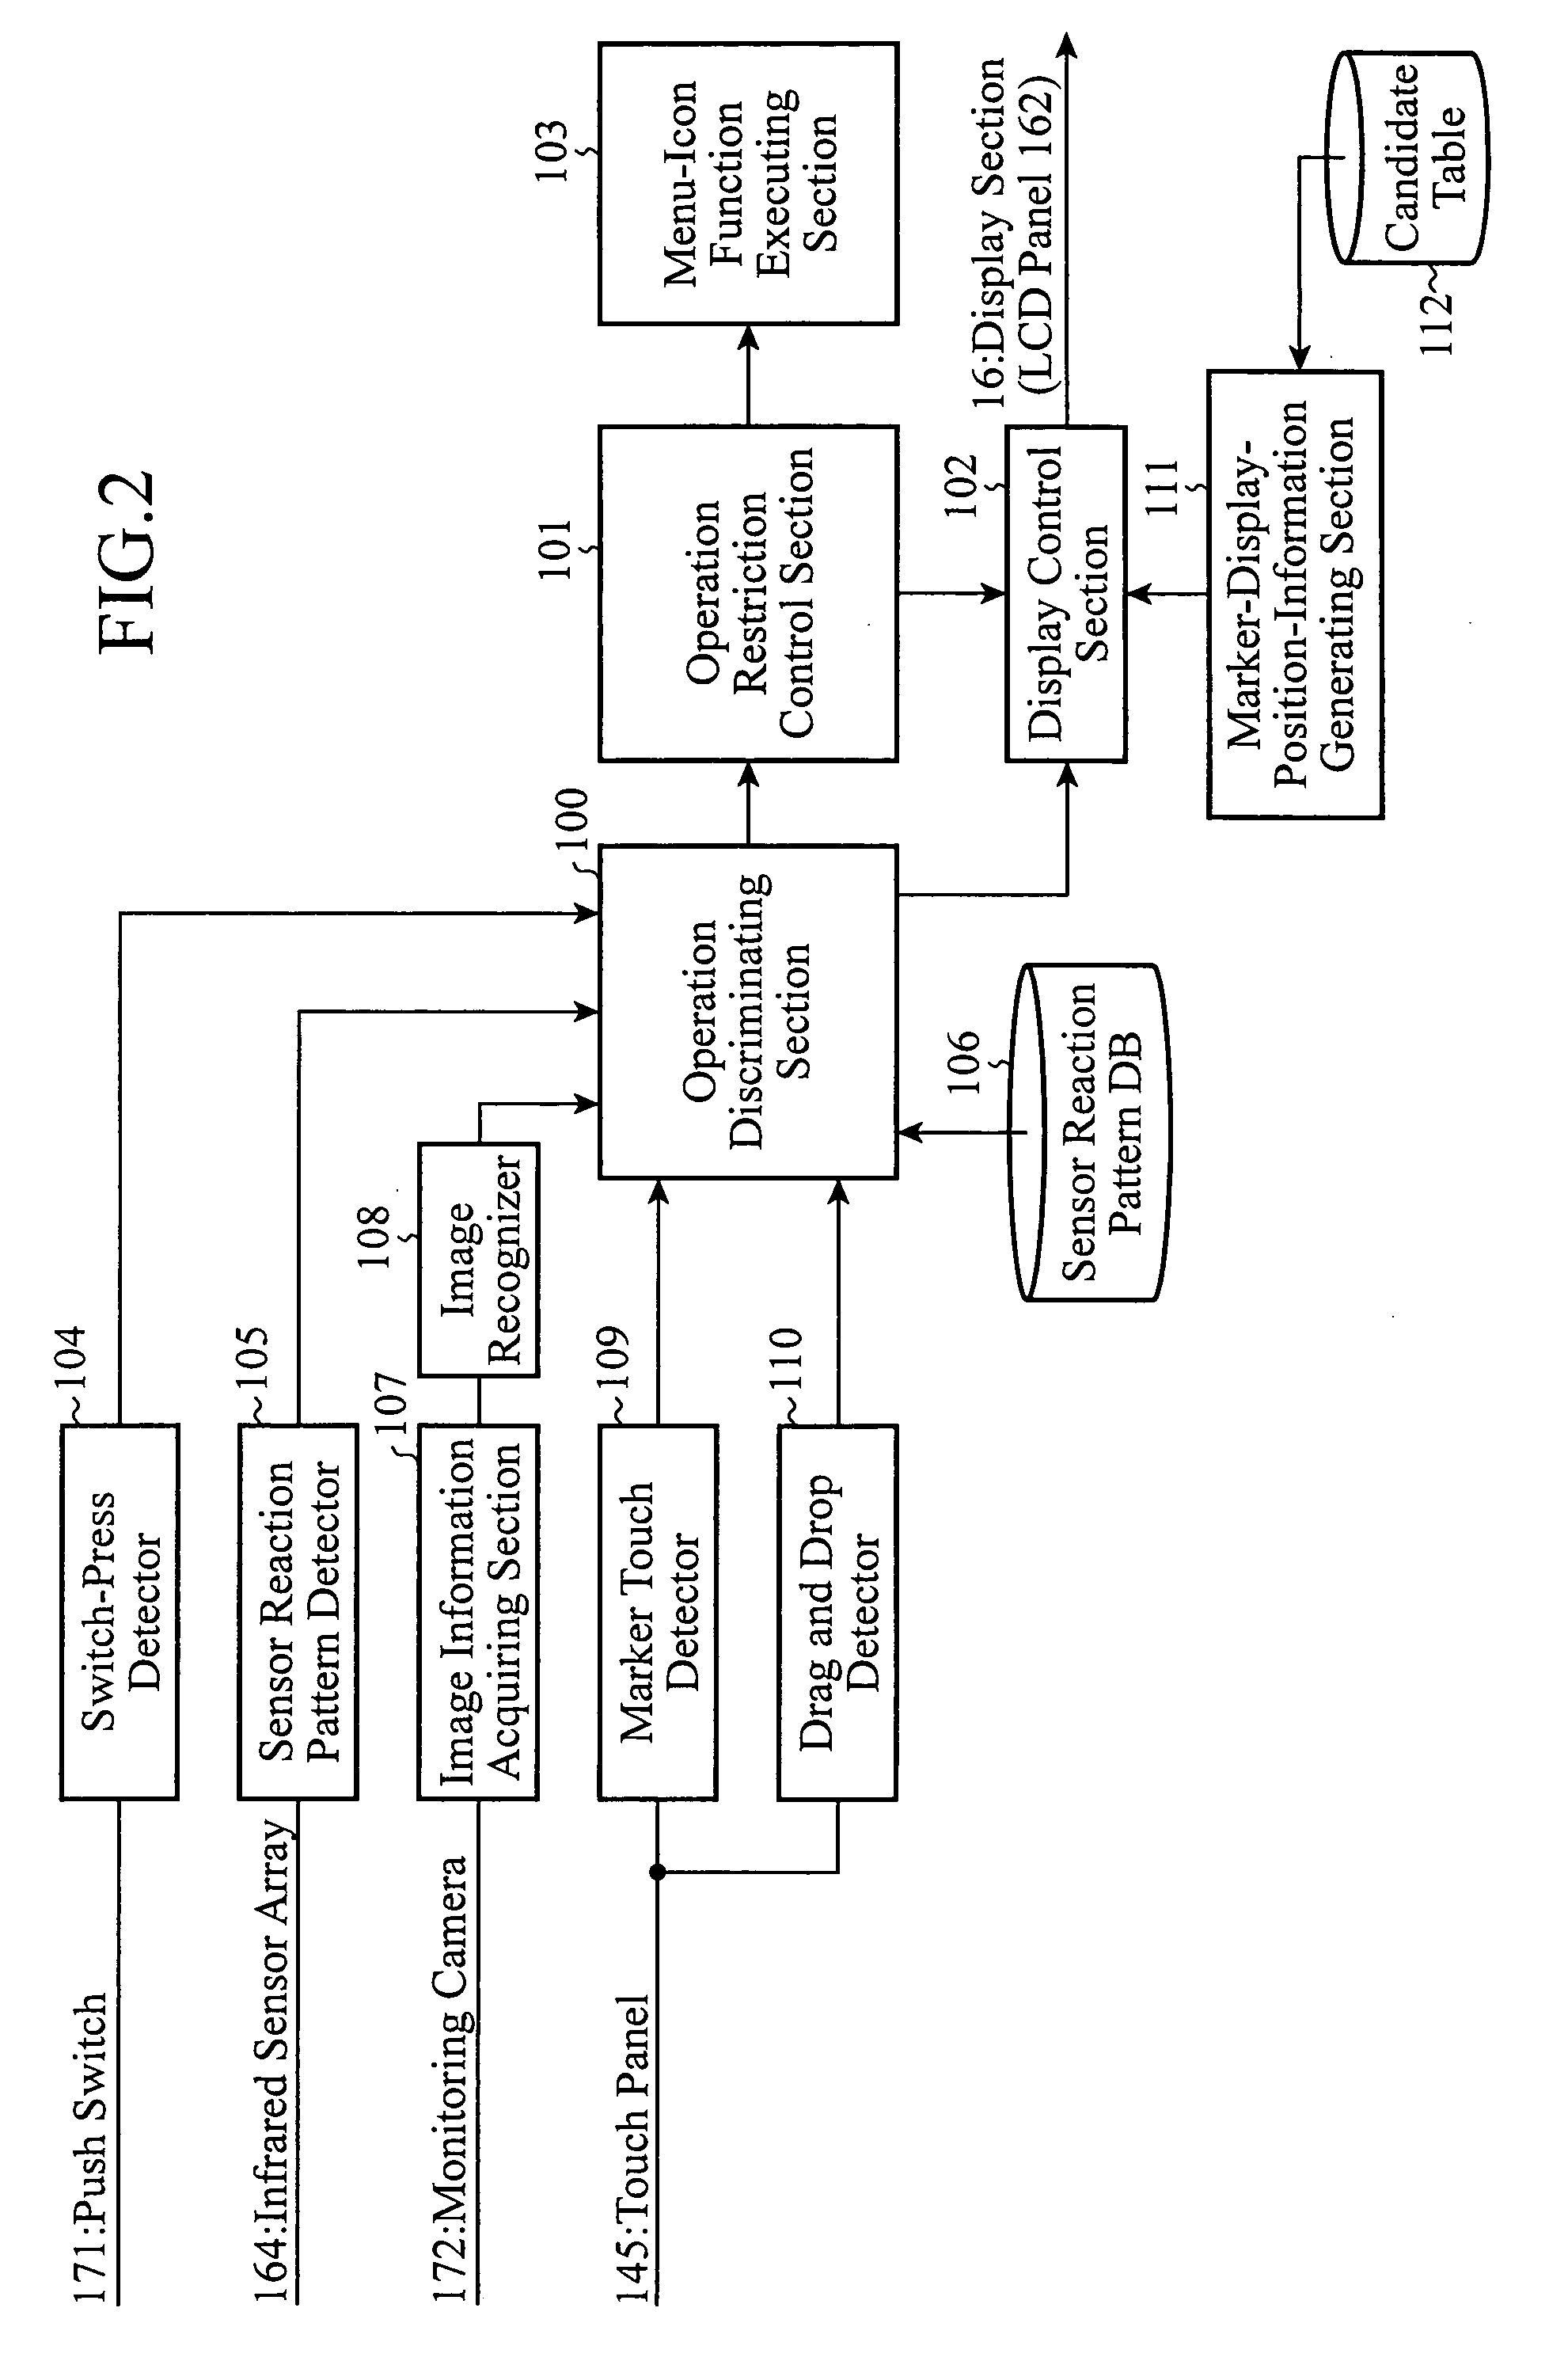 Display System and Method of Restricting Operation in Same